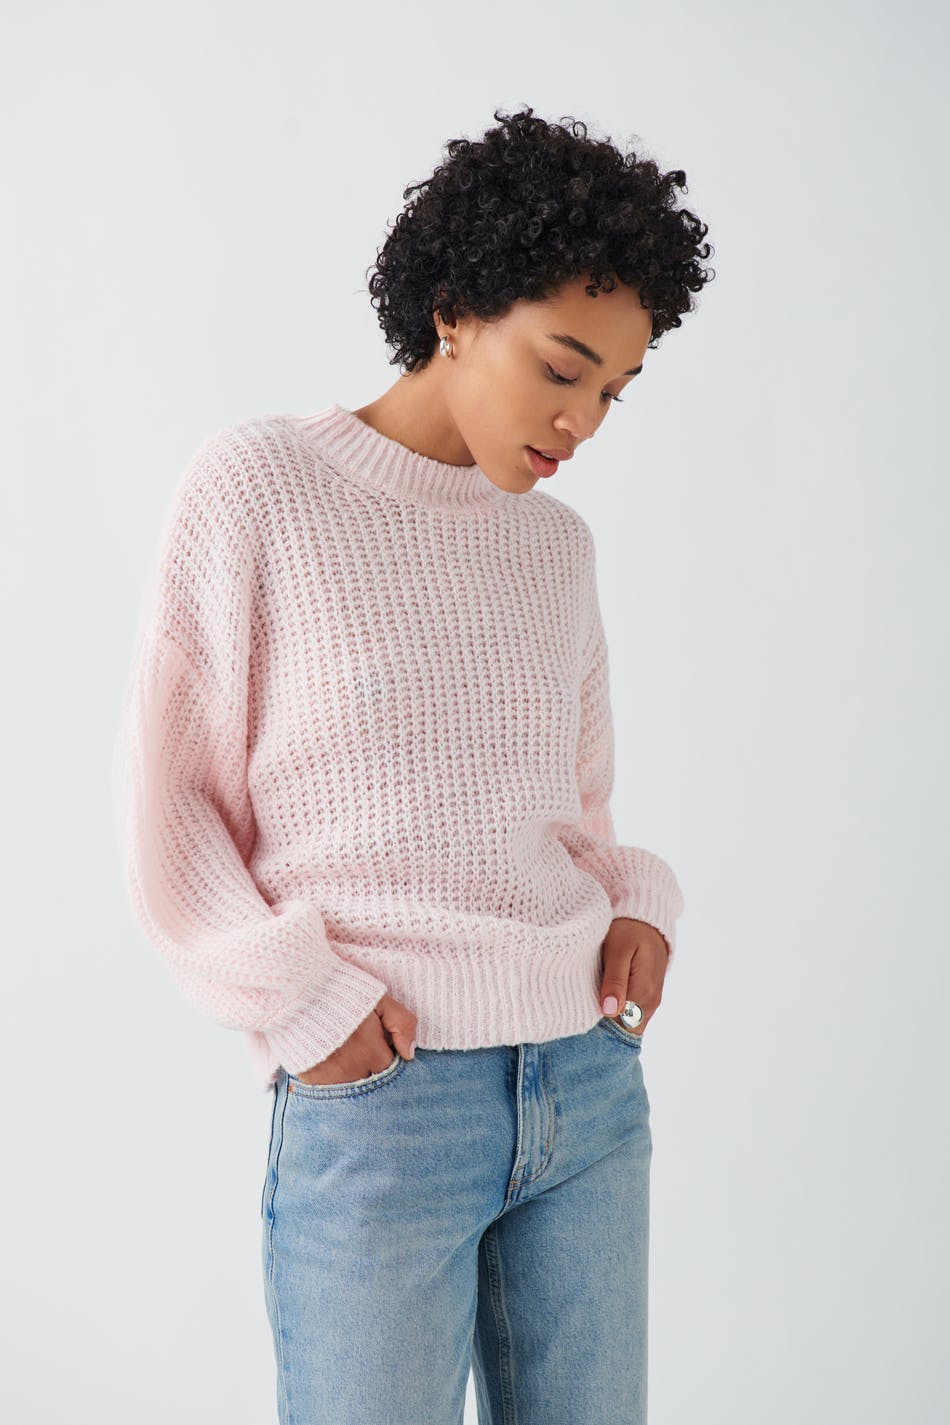 Gina Tricot - Chunky knitted sweater - stickade tröjor - Pink - M - Female